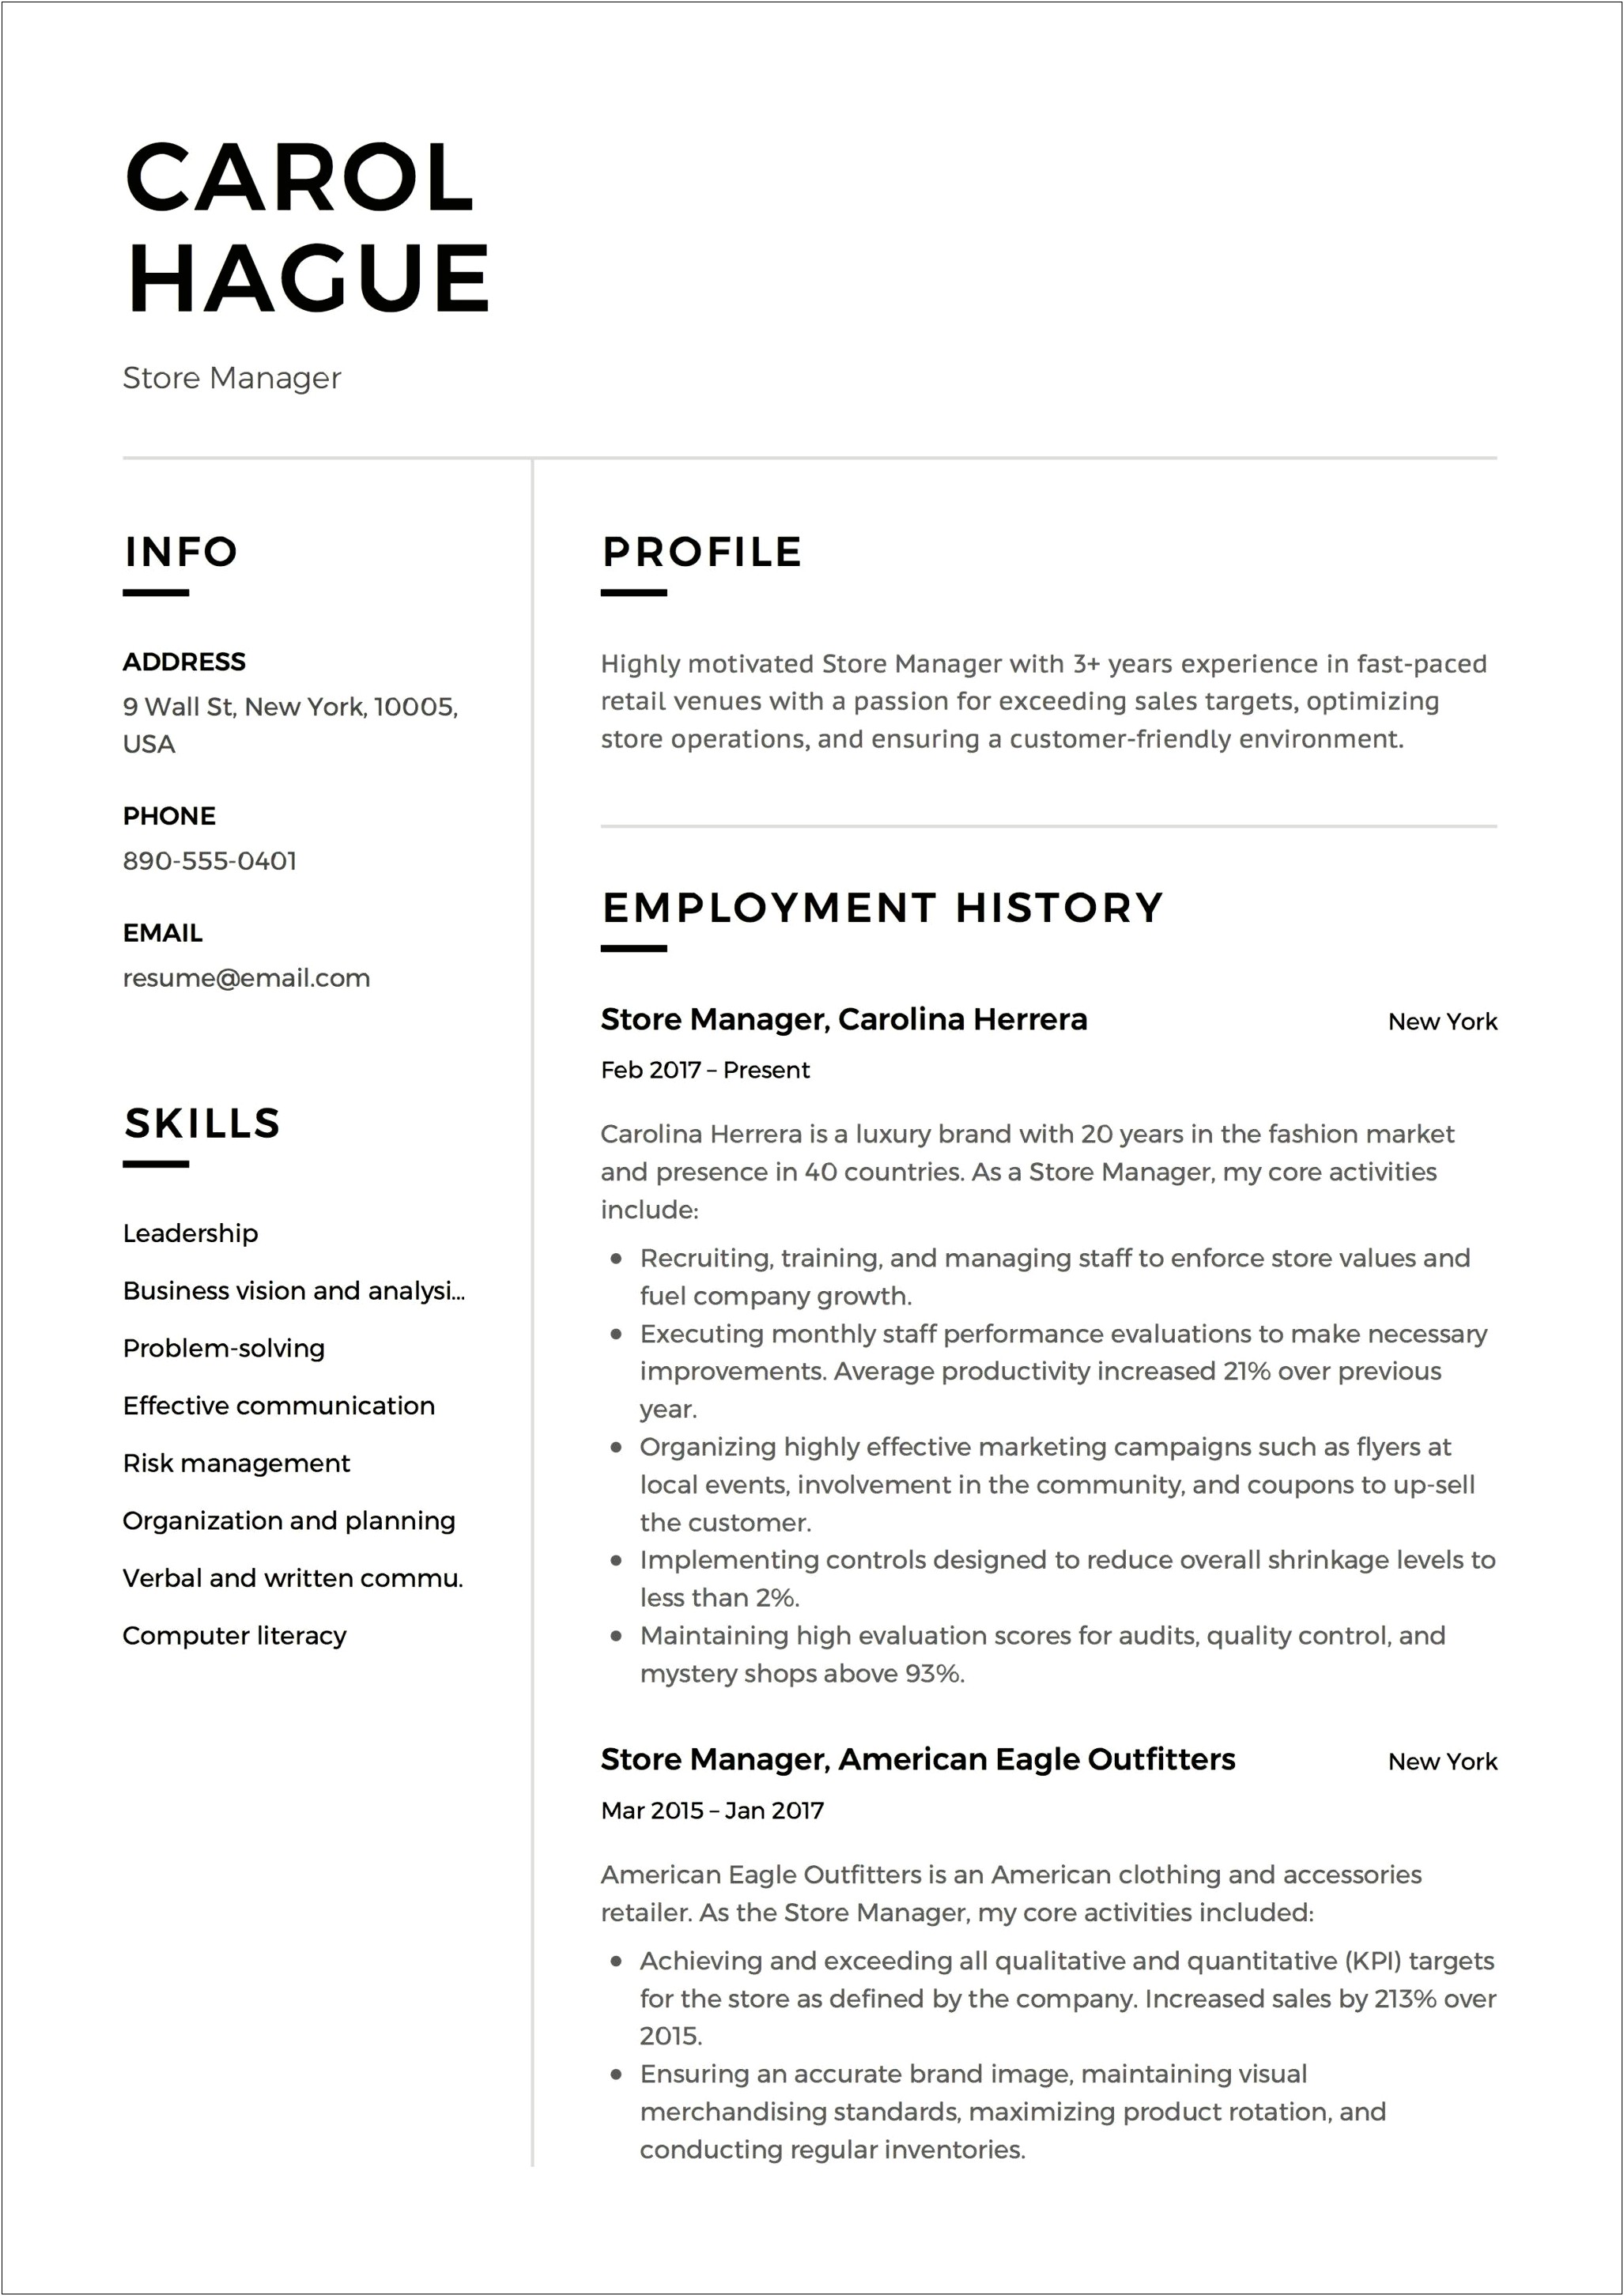 Resume Of Apparel Retail Store Manager